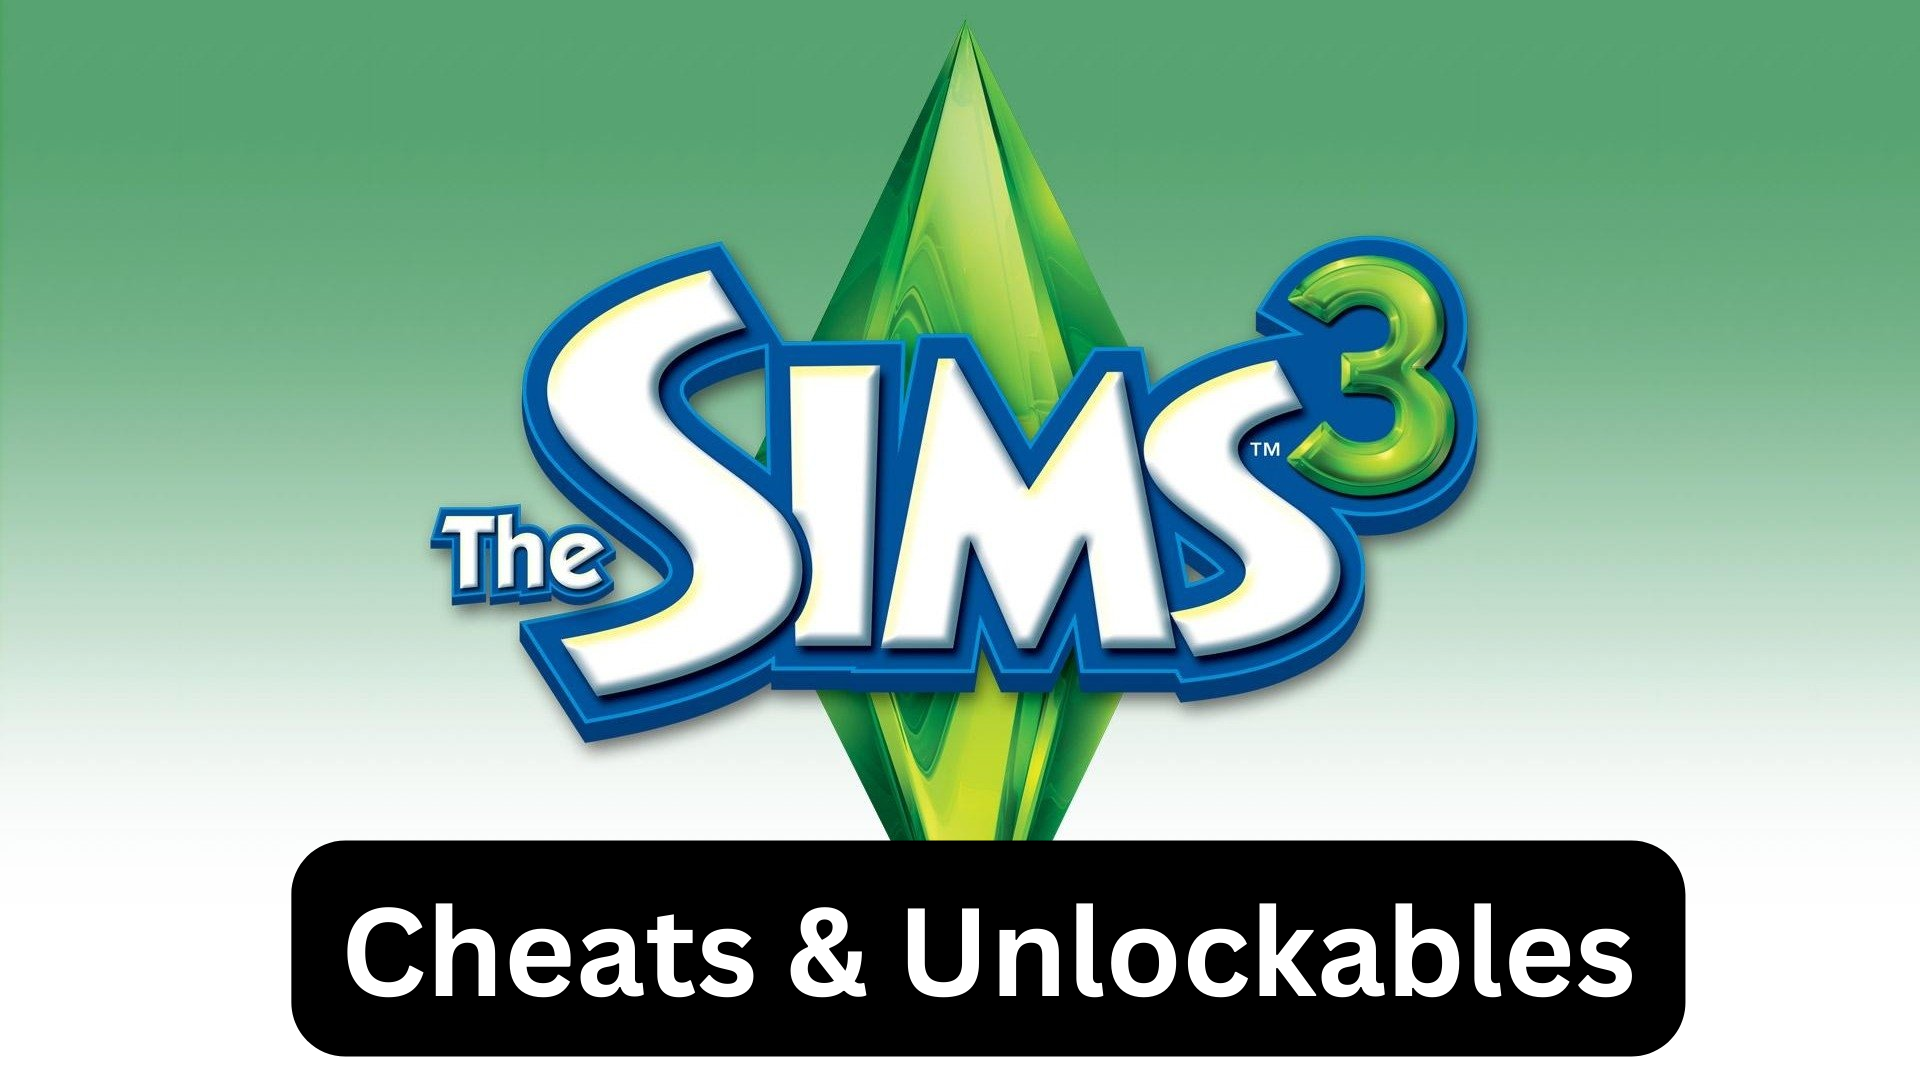 the sims 3 cheats and unlockables